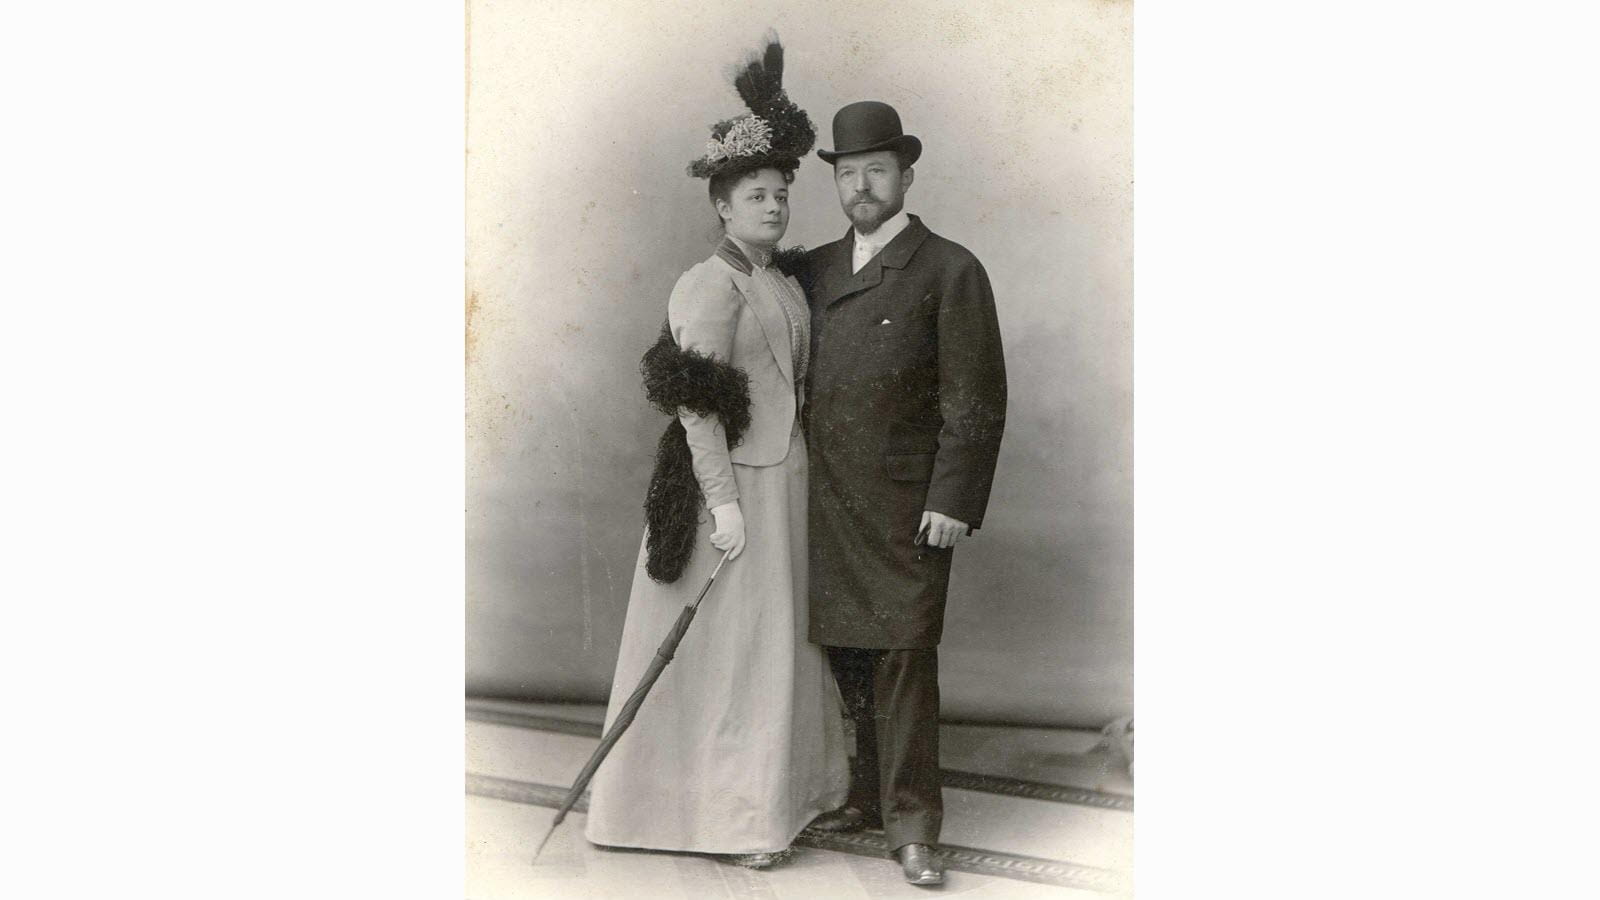 Emil von Behring and his wife Else